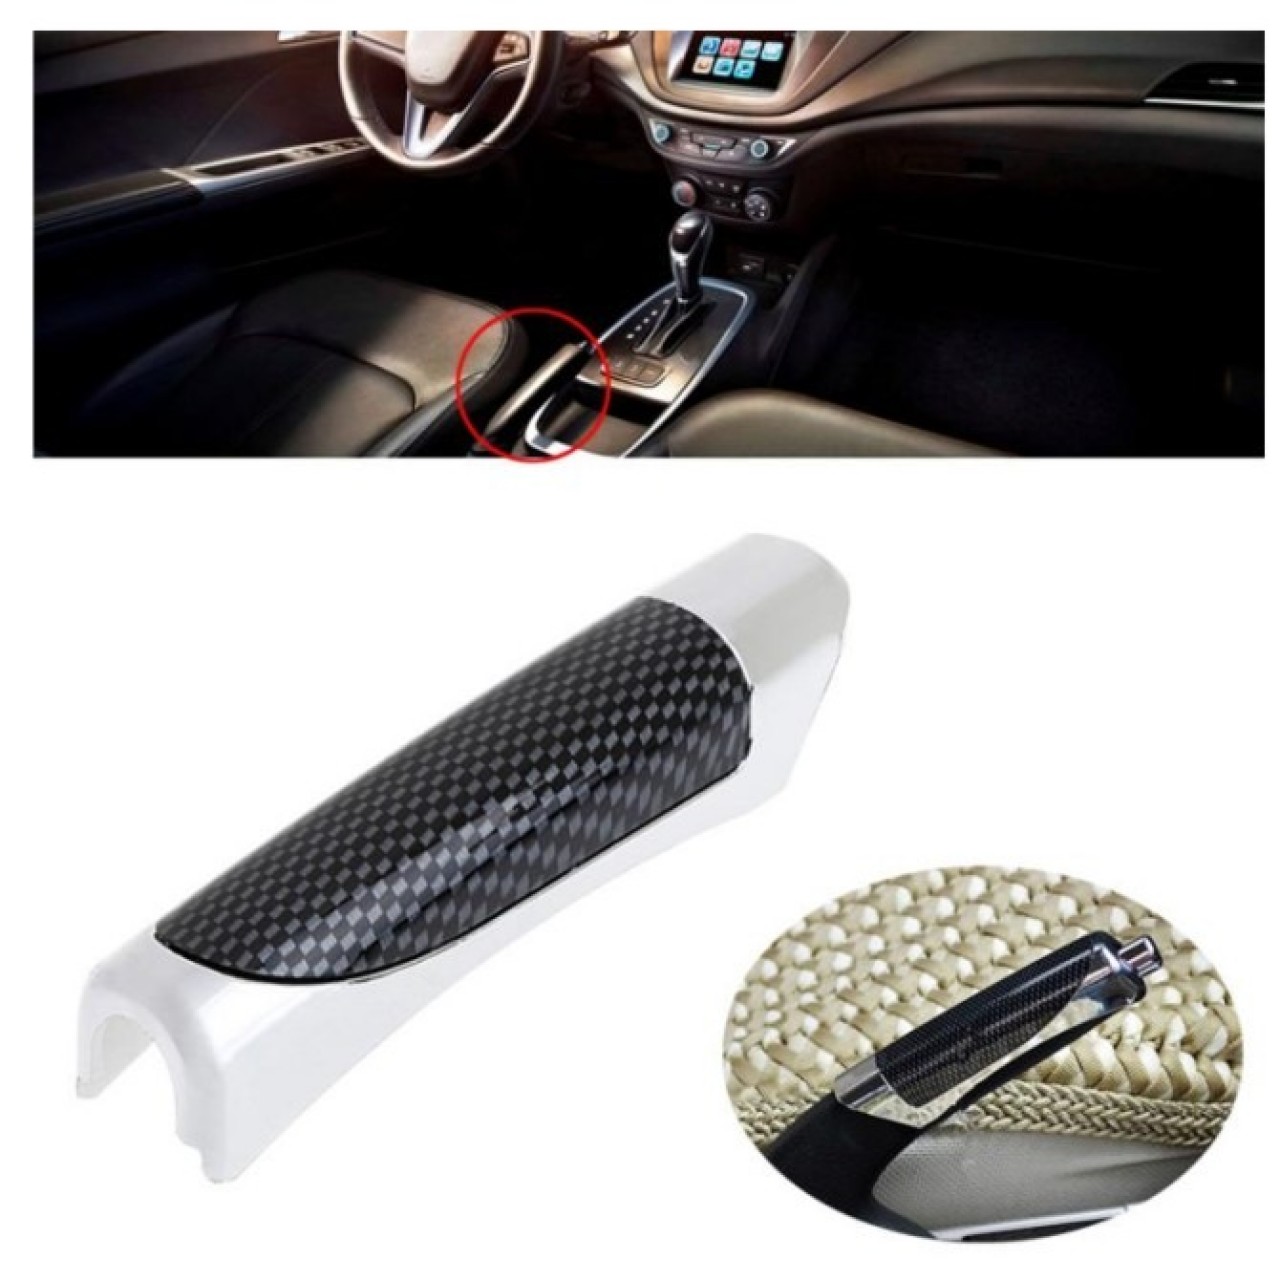 Carbon Fiber Style Hand Brake Protective Handle Cover - Black